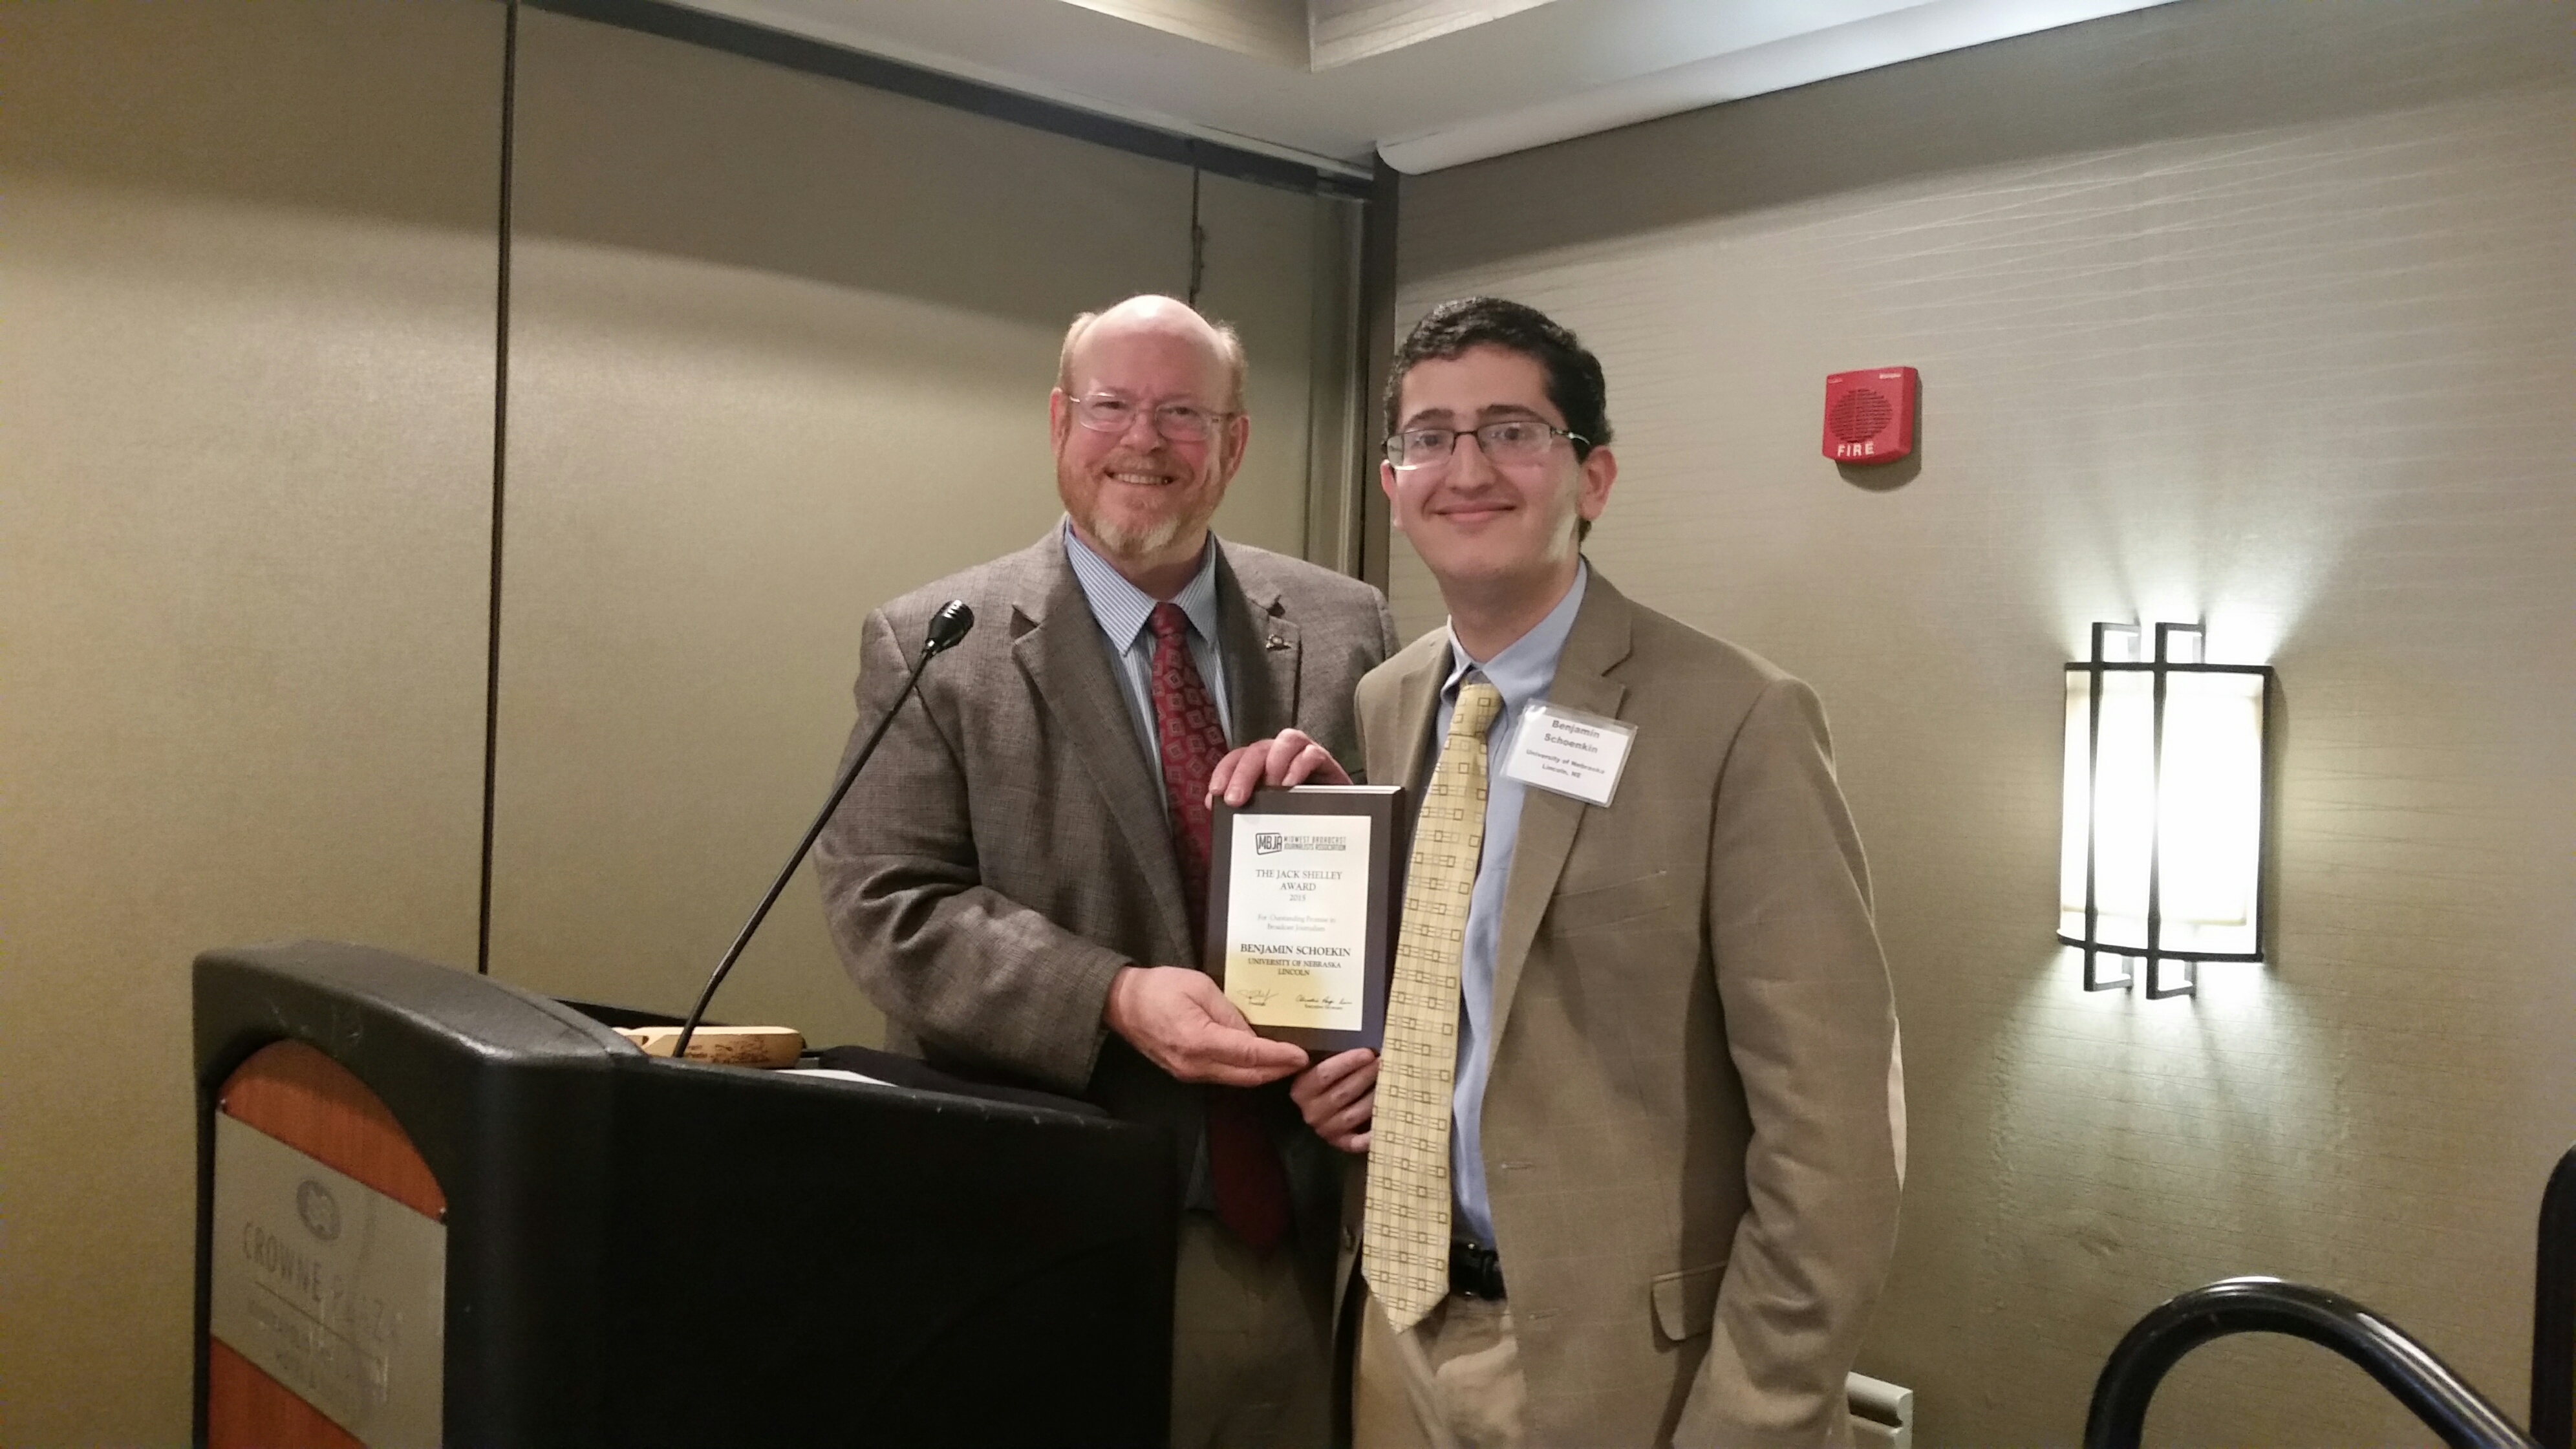 Political Science major receives awards at Midwest Journalism Conference